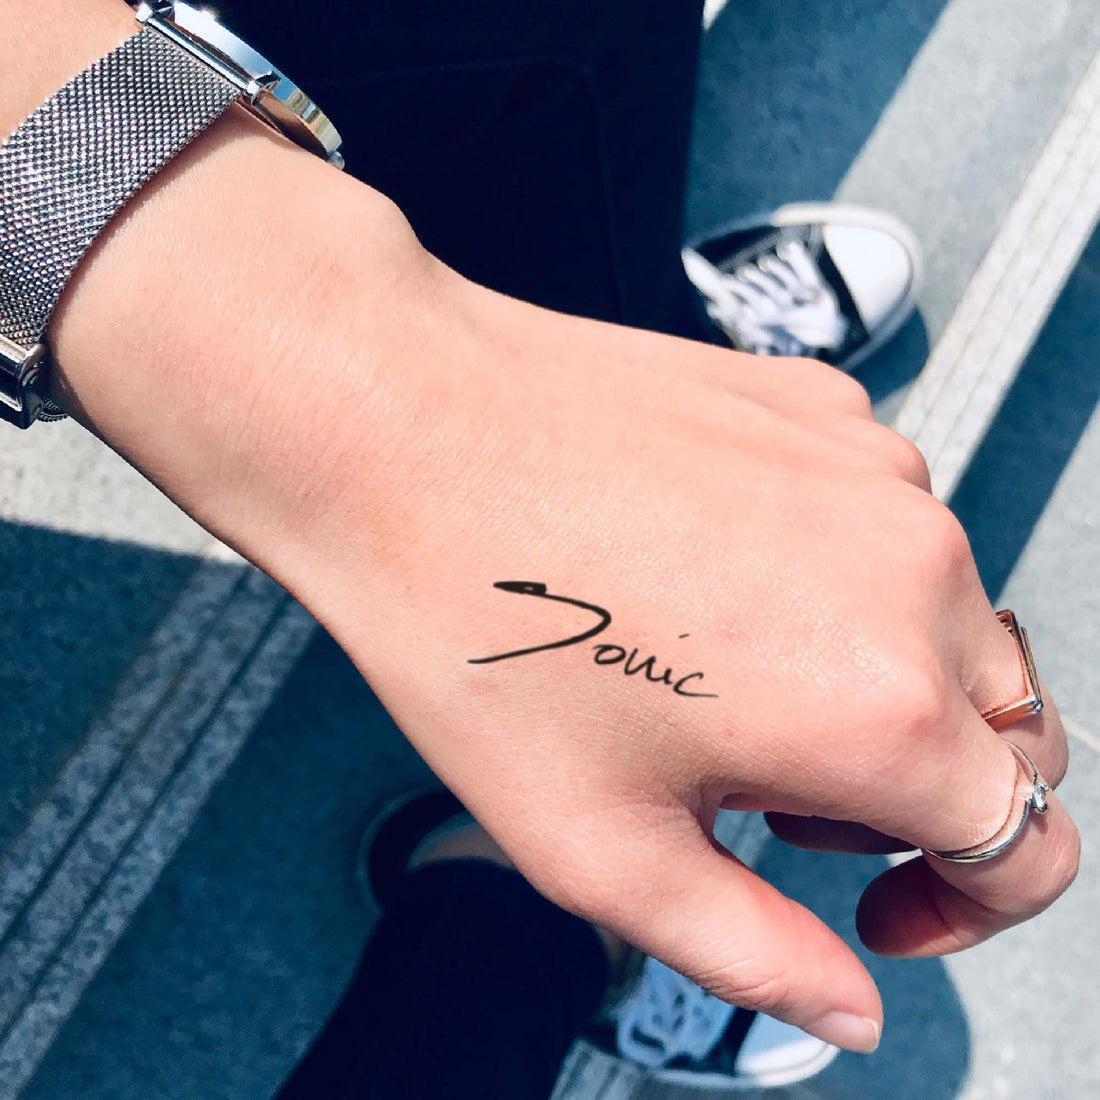 Sonic custom temporary tattoo sticker design idea inspiration meanings removal arm wrist hand words font name signature calligraphy lyrics tour concert outfits merch accessory gift souvenir costumes wear dress up code